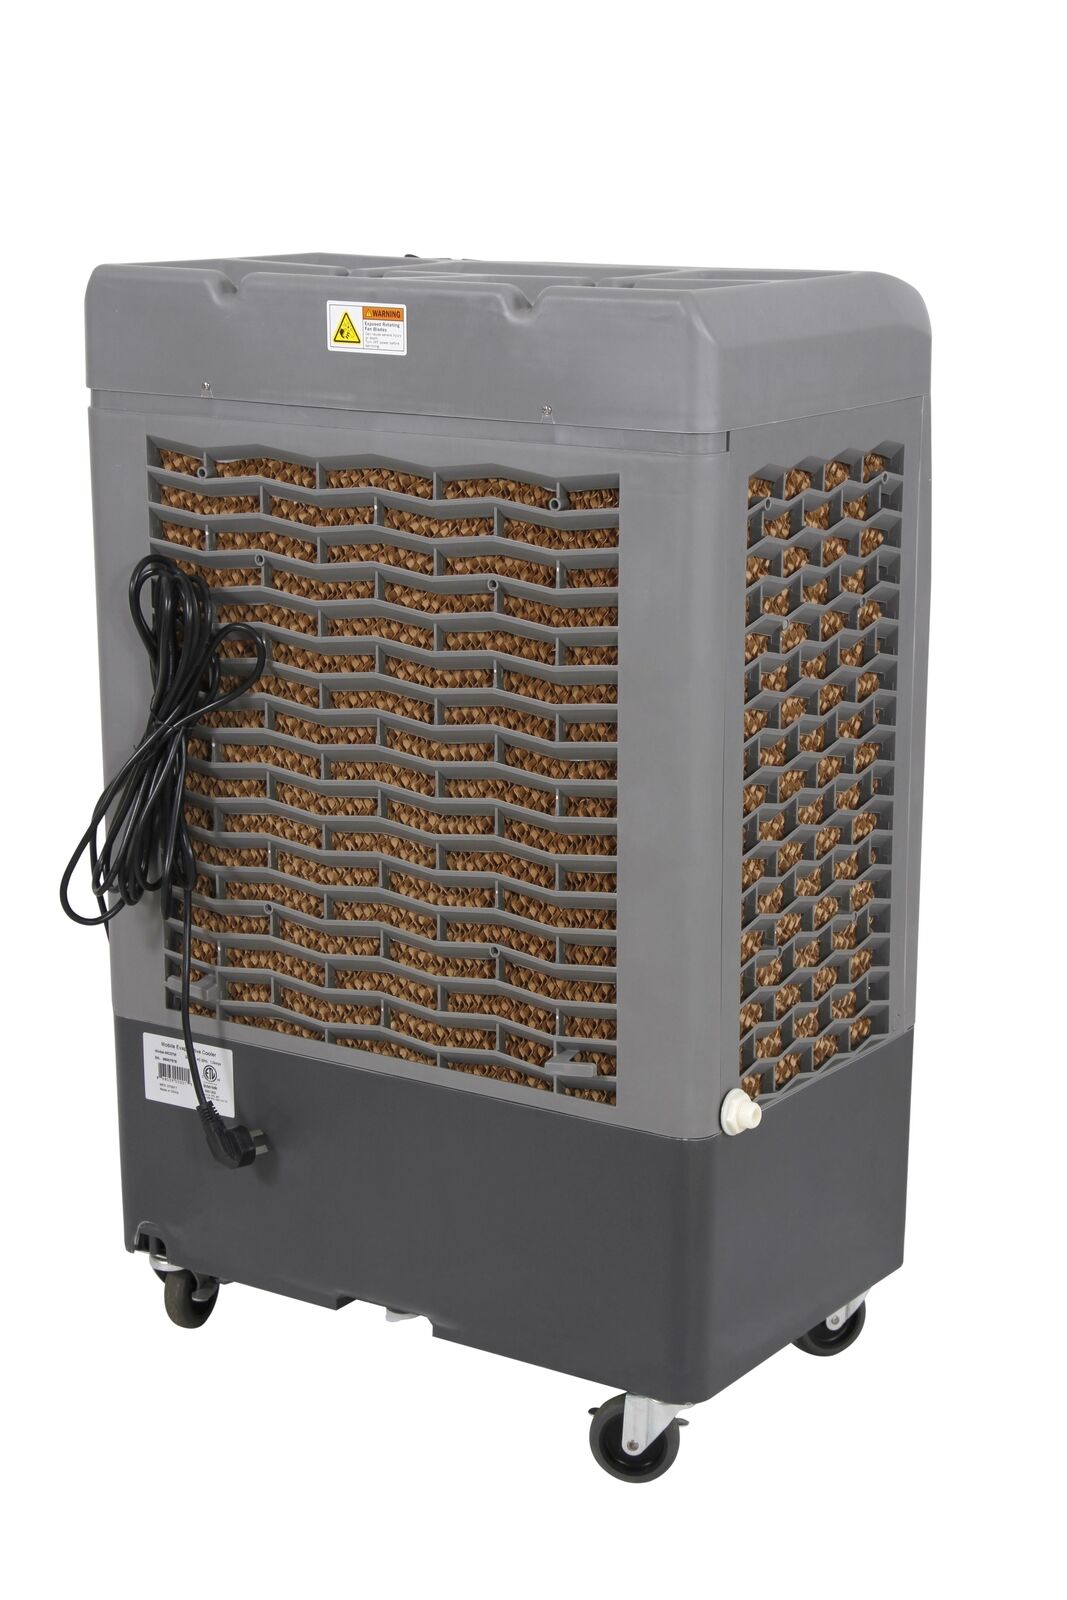 Hessaire MC37M Indoor/Outdoor Portable 950 Sq Ft Evaporative Air Cooler - image 2 of 16